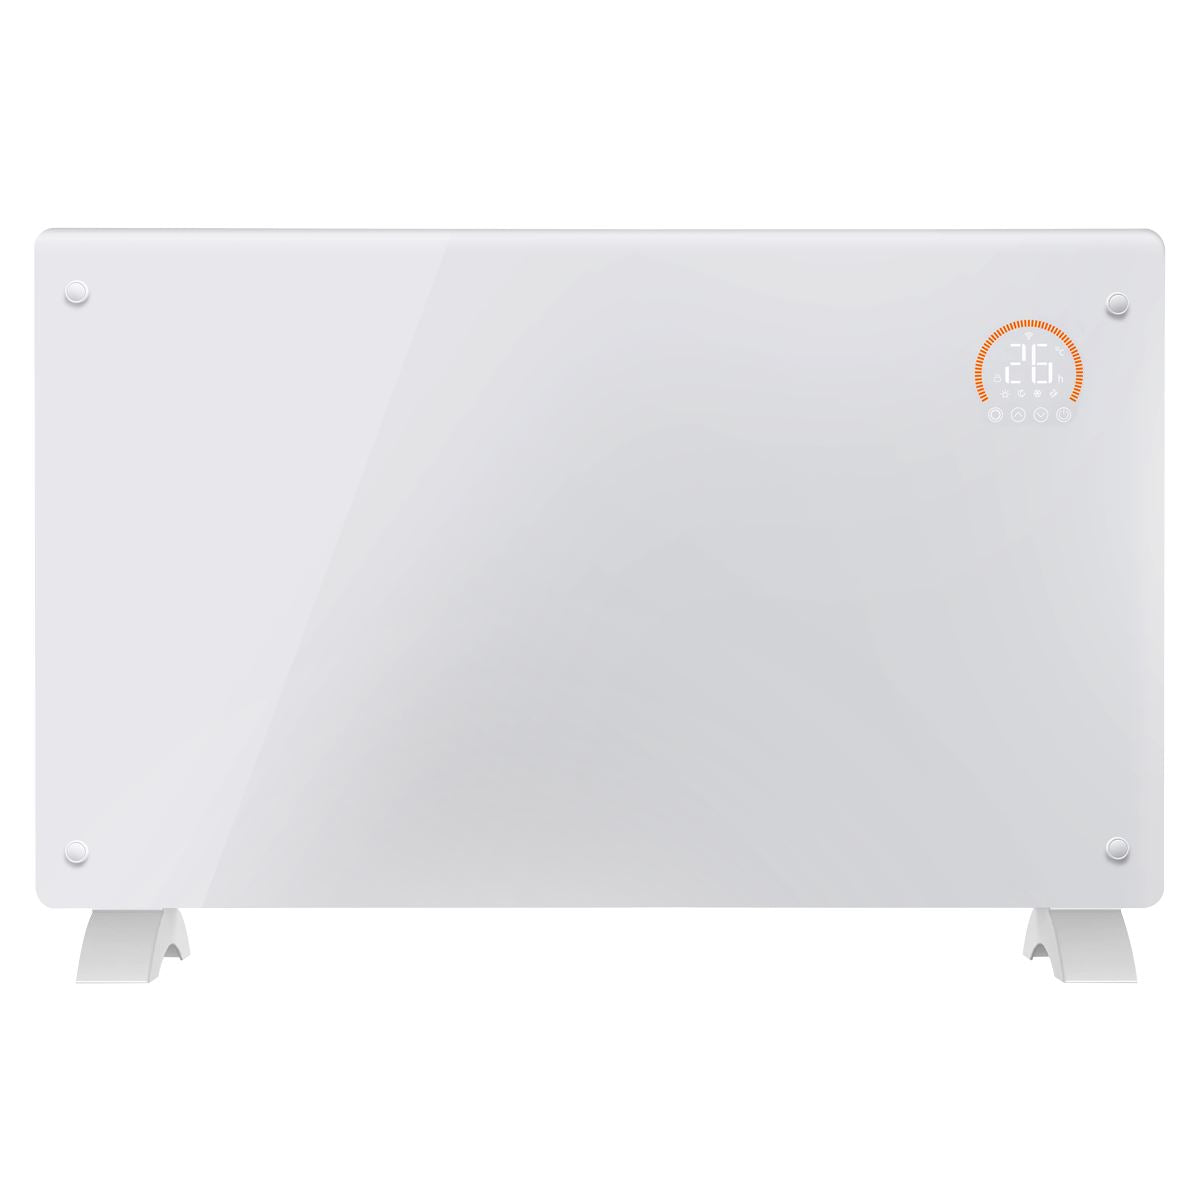 Baridi Electric Glass Panel Heater, 2000W, Thermostat Controlled 24Hr 7 Day Timer, Wi-Fi Enabled, Remote Control, White